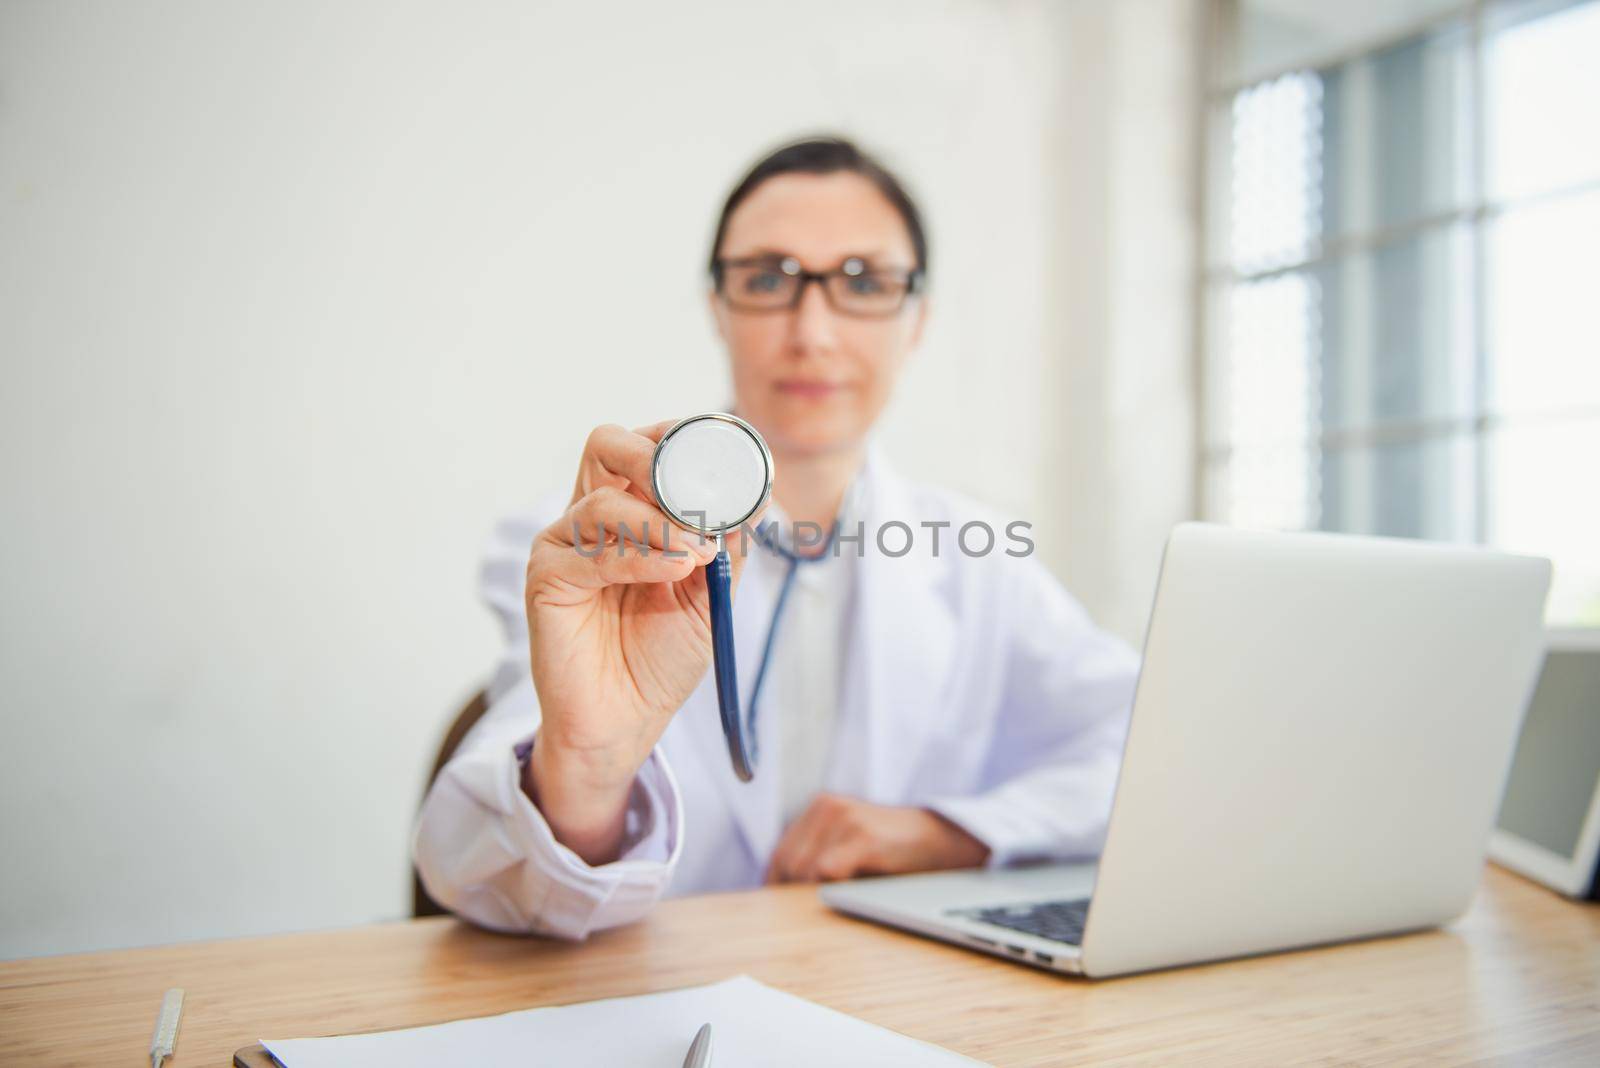 Medical Doctor is Examining Patient Health With Stethoscope in Hospital Examination Room, Female Physician Doctor is Diagnosing Physical Health Check Up for Patients. Medicine/Healthcare Concept by MahaHeang245789